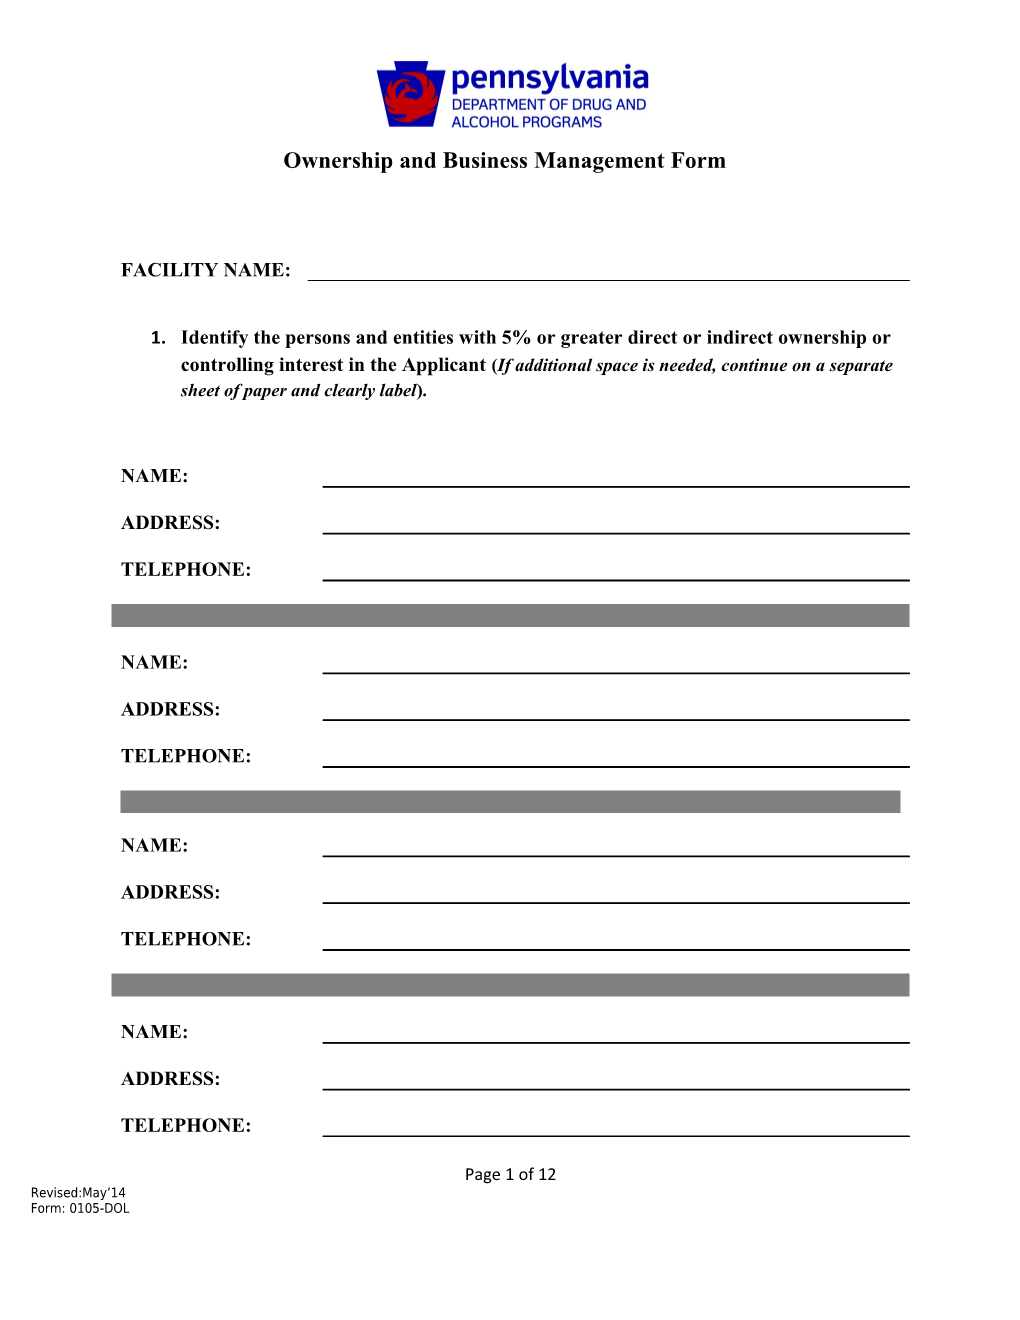 Ownership and Business Management Form